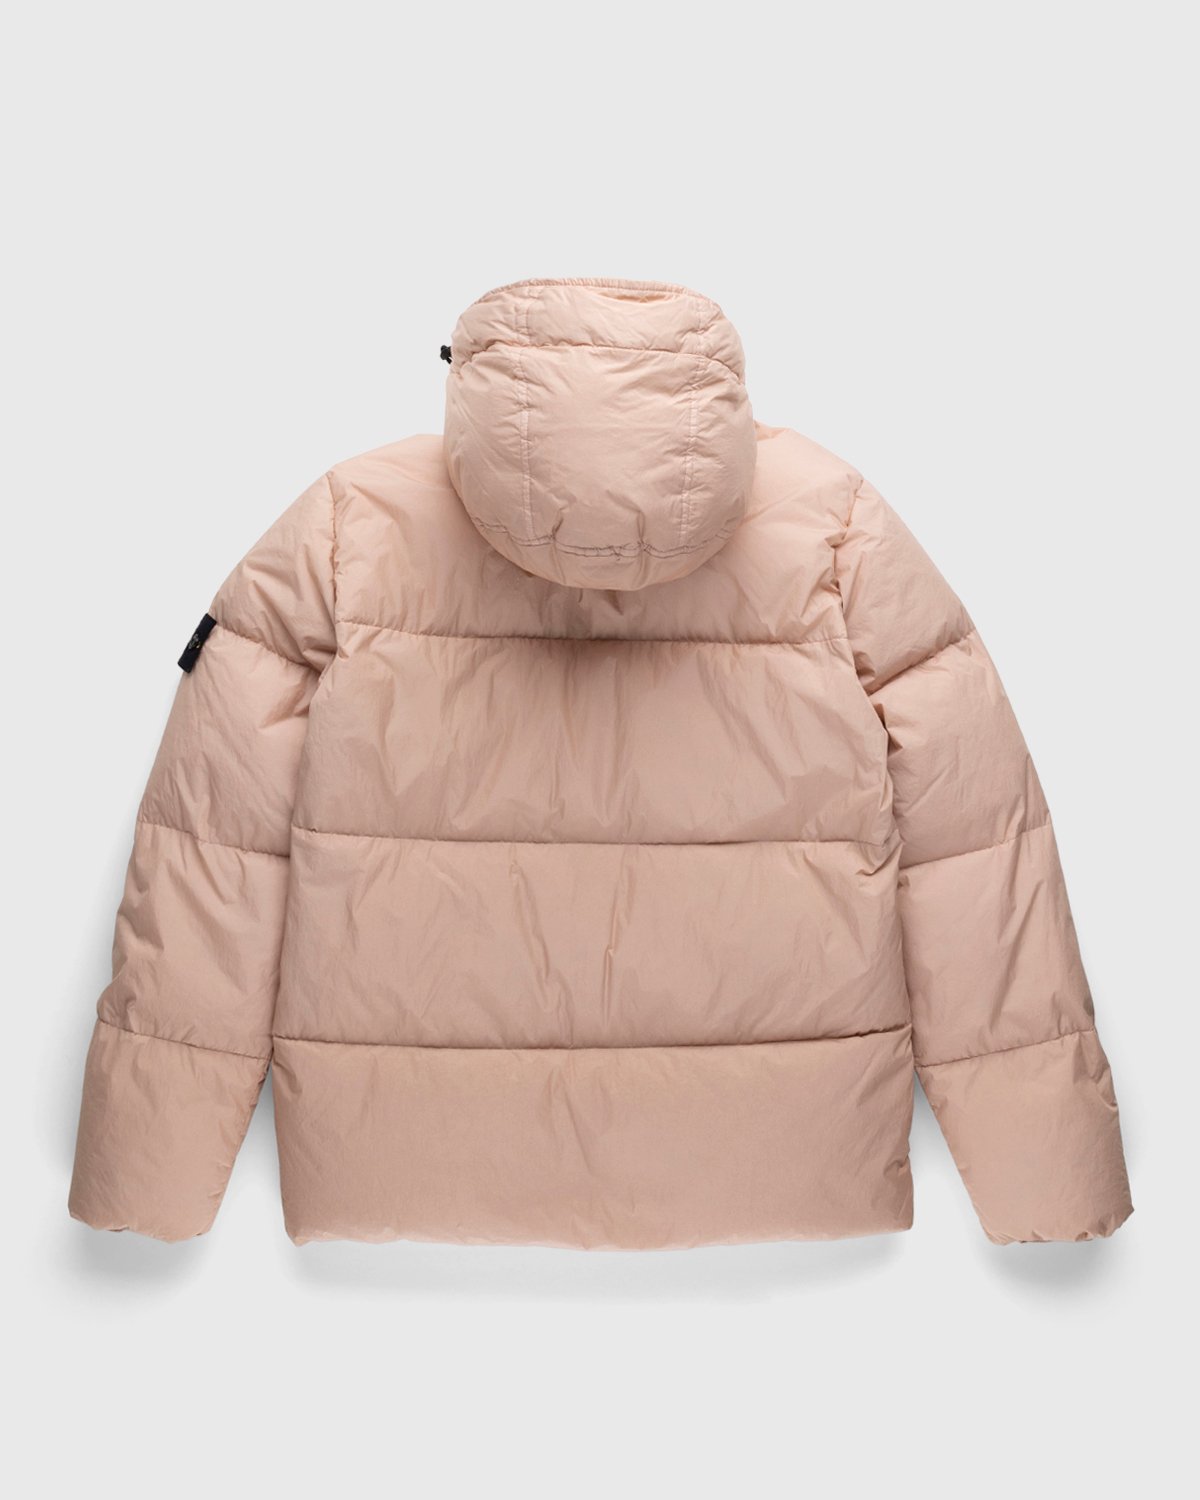 Stone Island - Real Down Jacket Rustic Rose - Clothing - Pink - Image 2